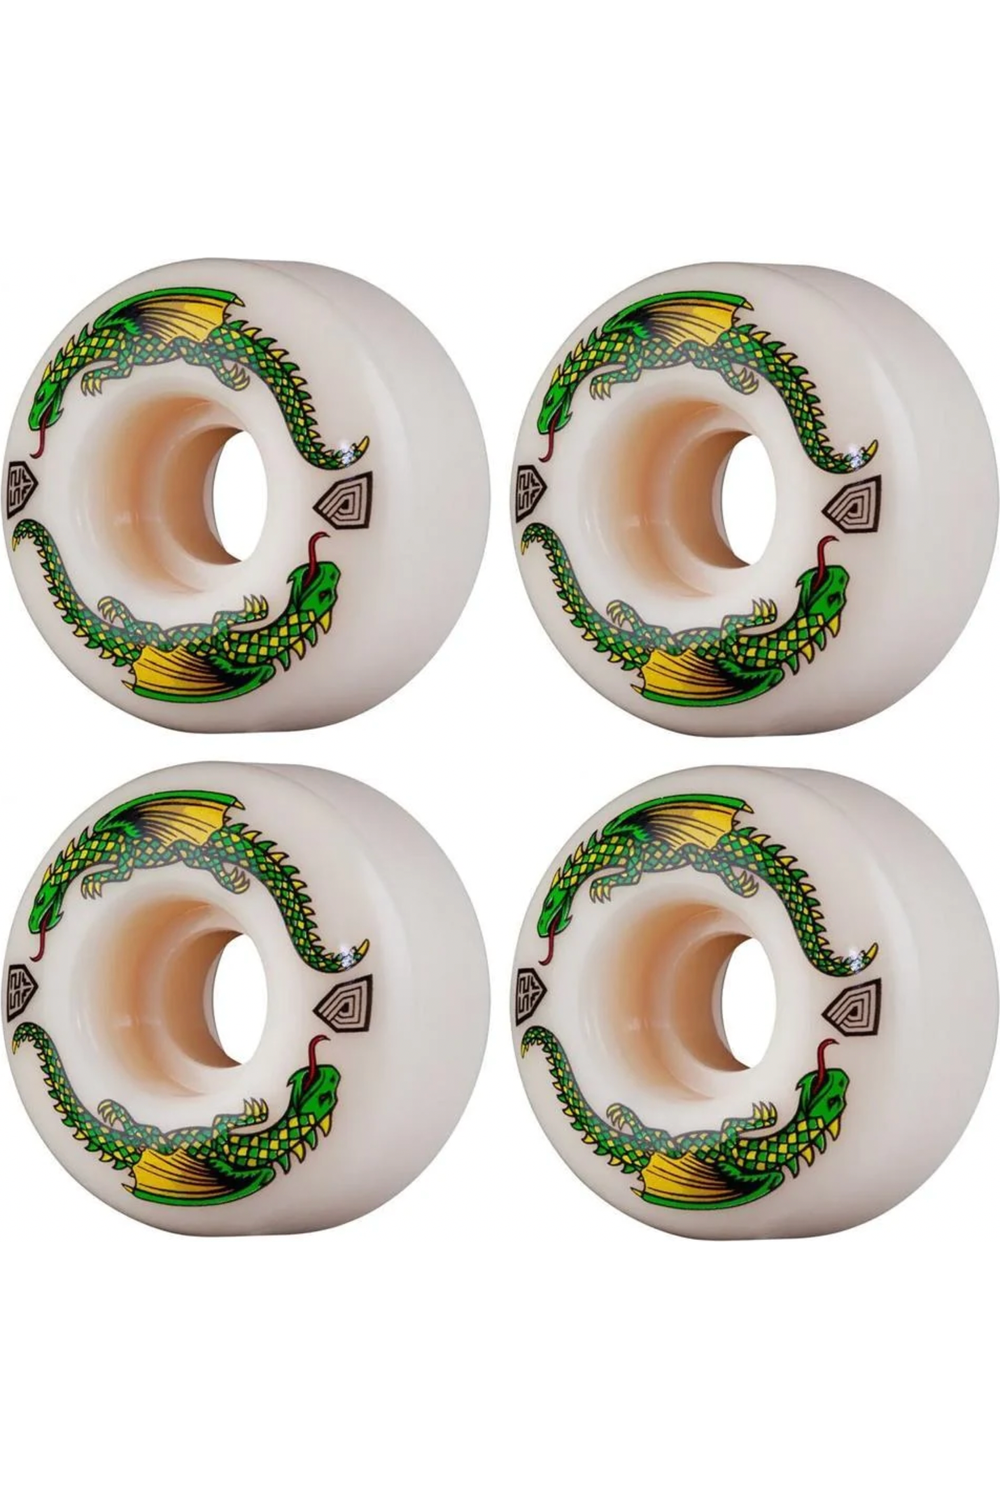 Powell Peralta Dragon Formula 52mm x 31mm 93A Off White